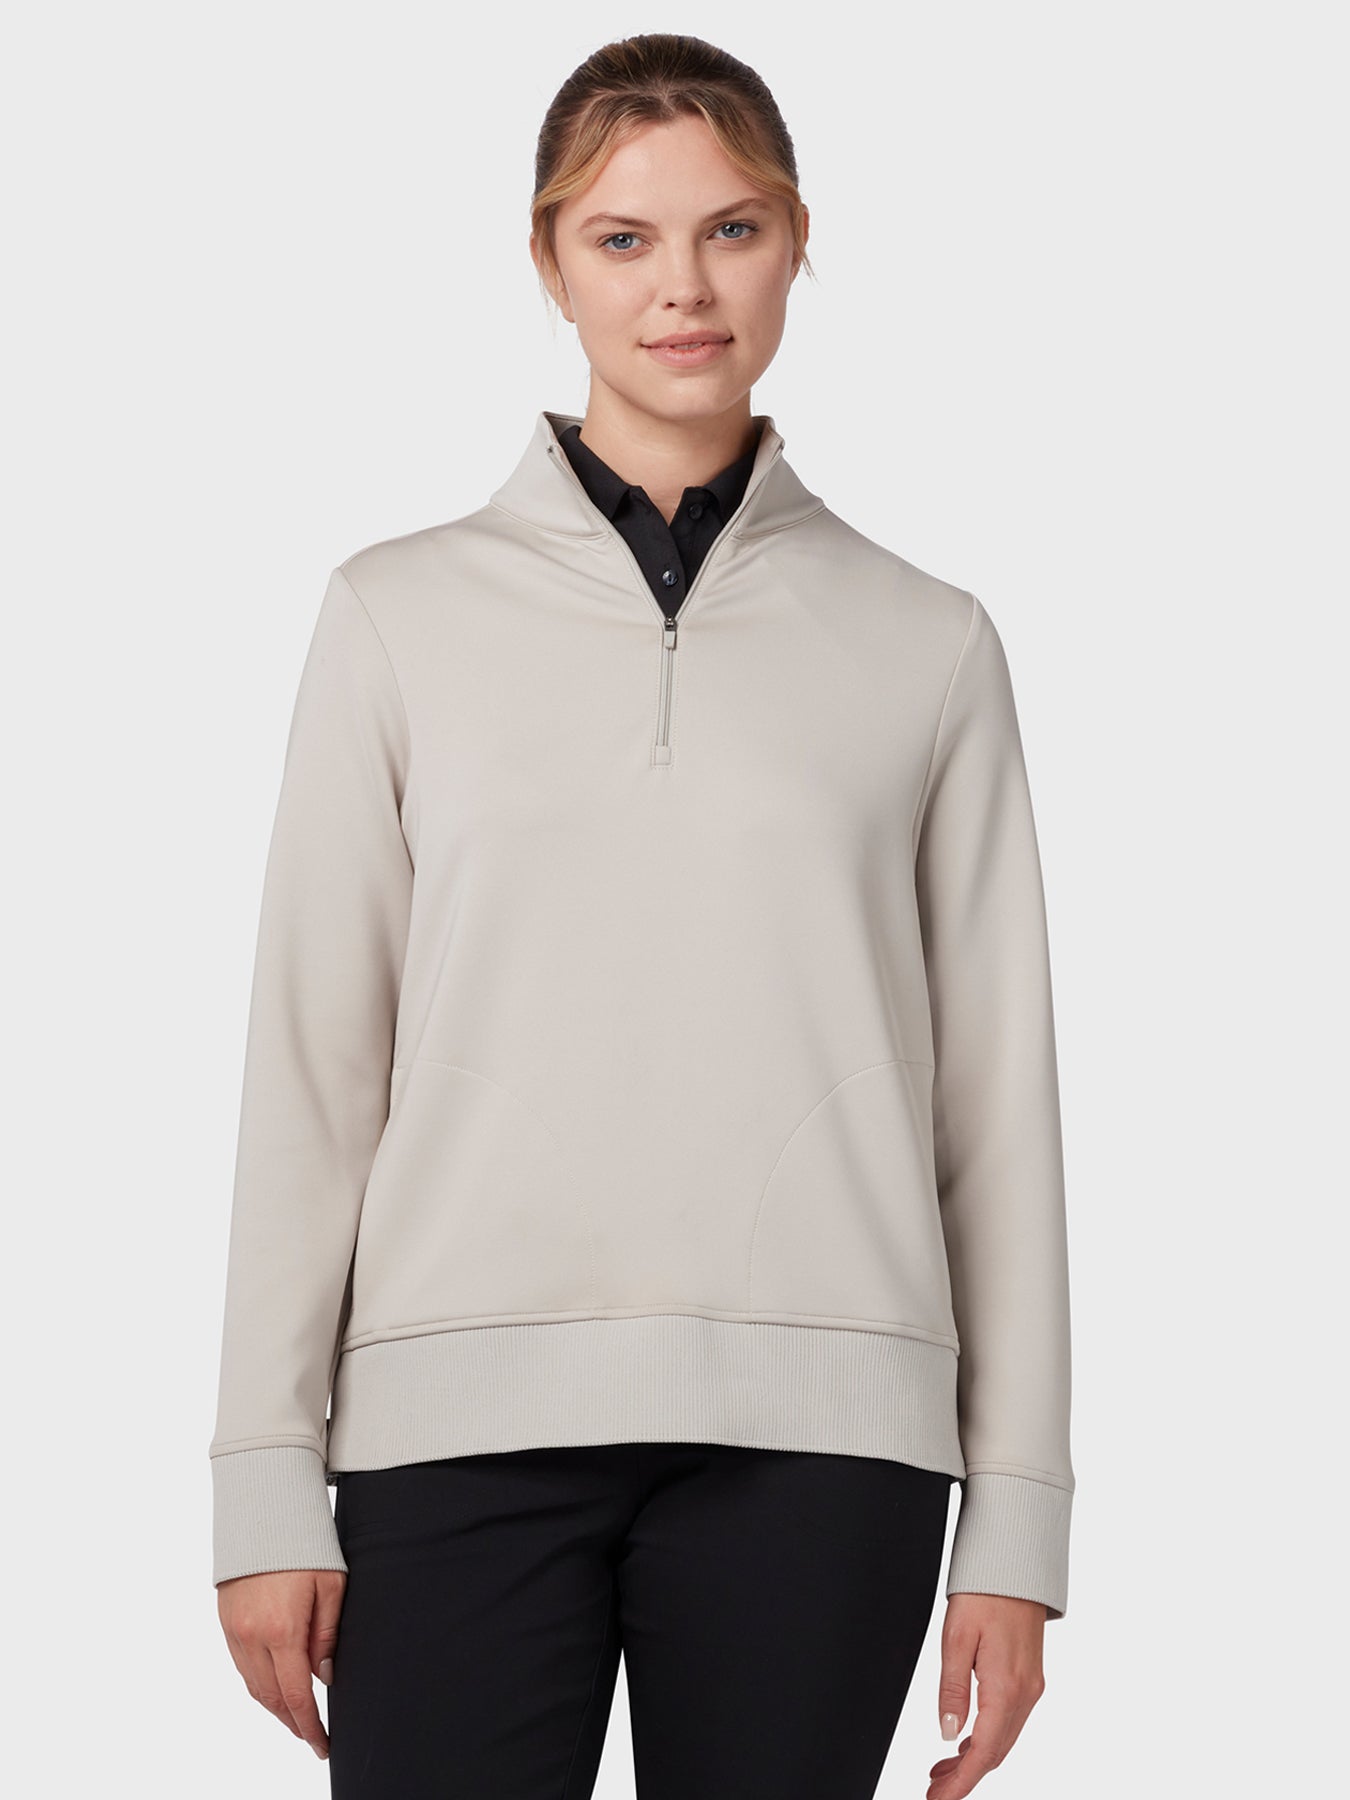 View Midweight Womens Fleece Crossover In Chateau Grey Chateau Grey M information